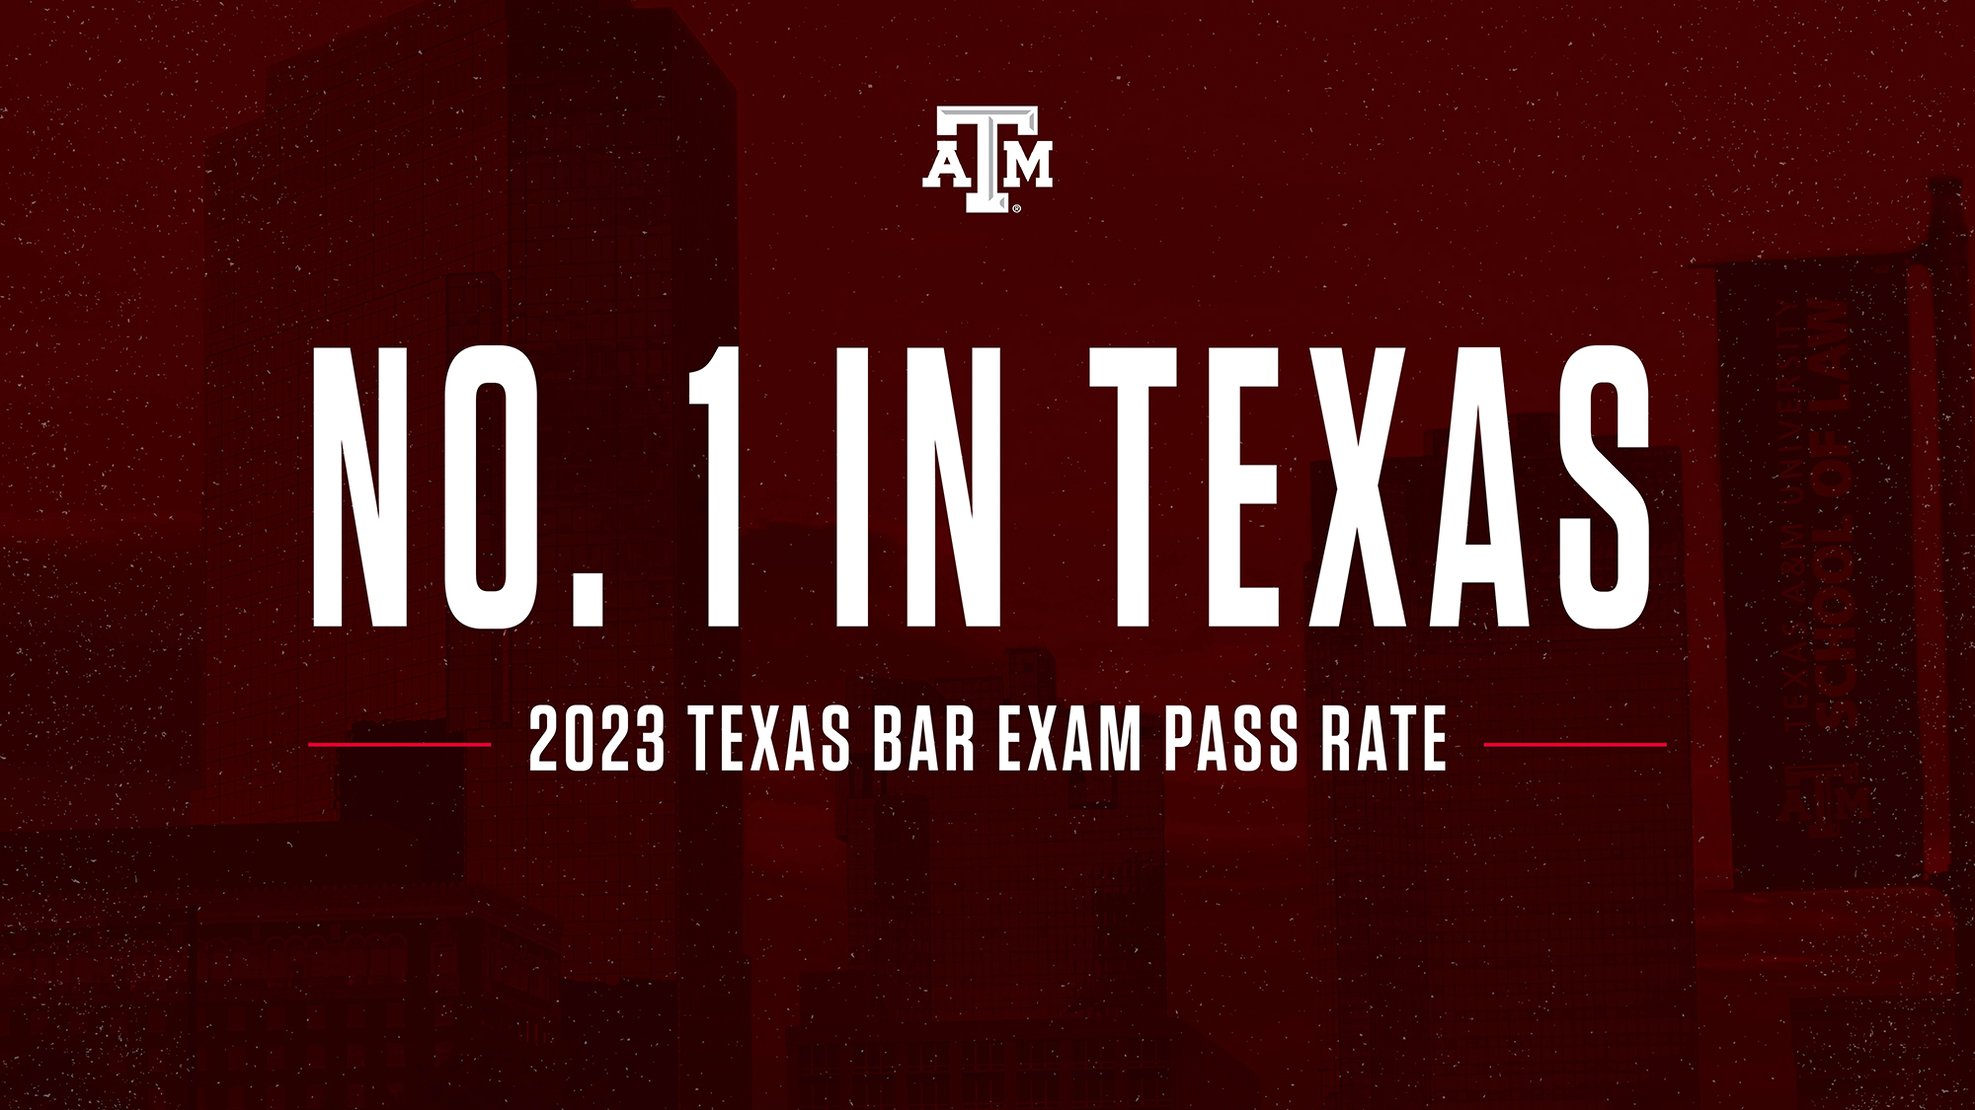 Texas A&M Law Ranks No. 1 In Texas Bar Pass Rate